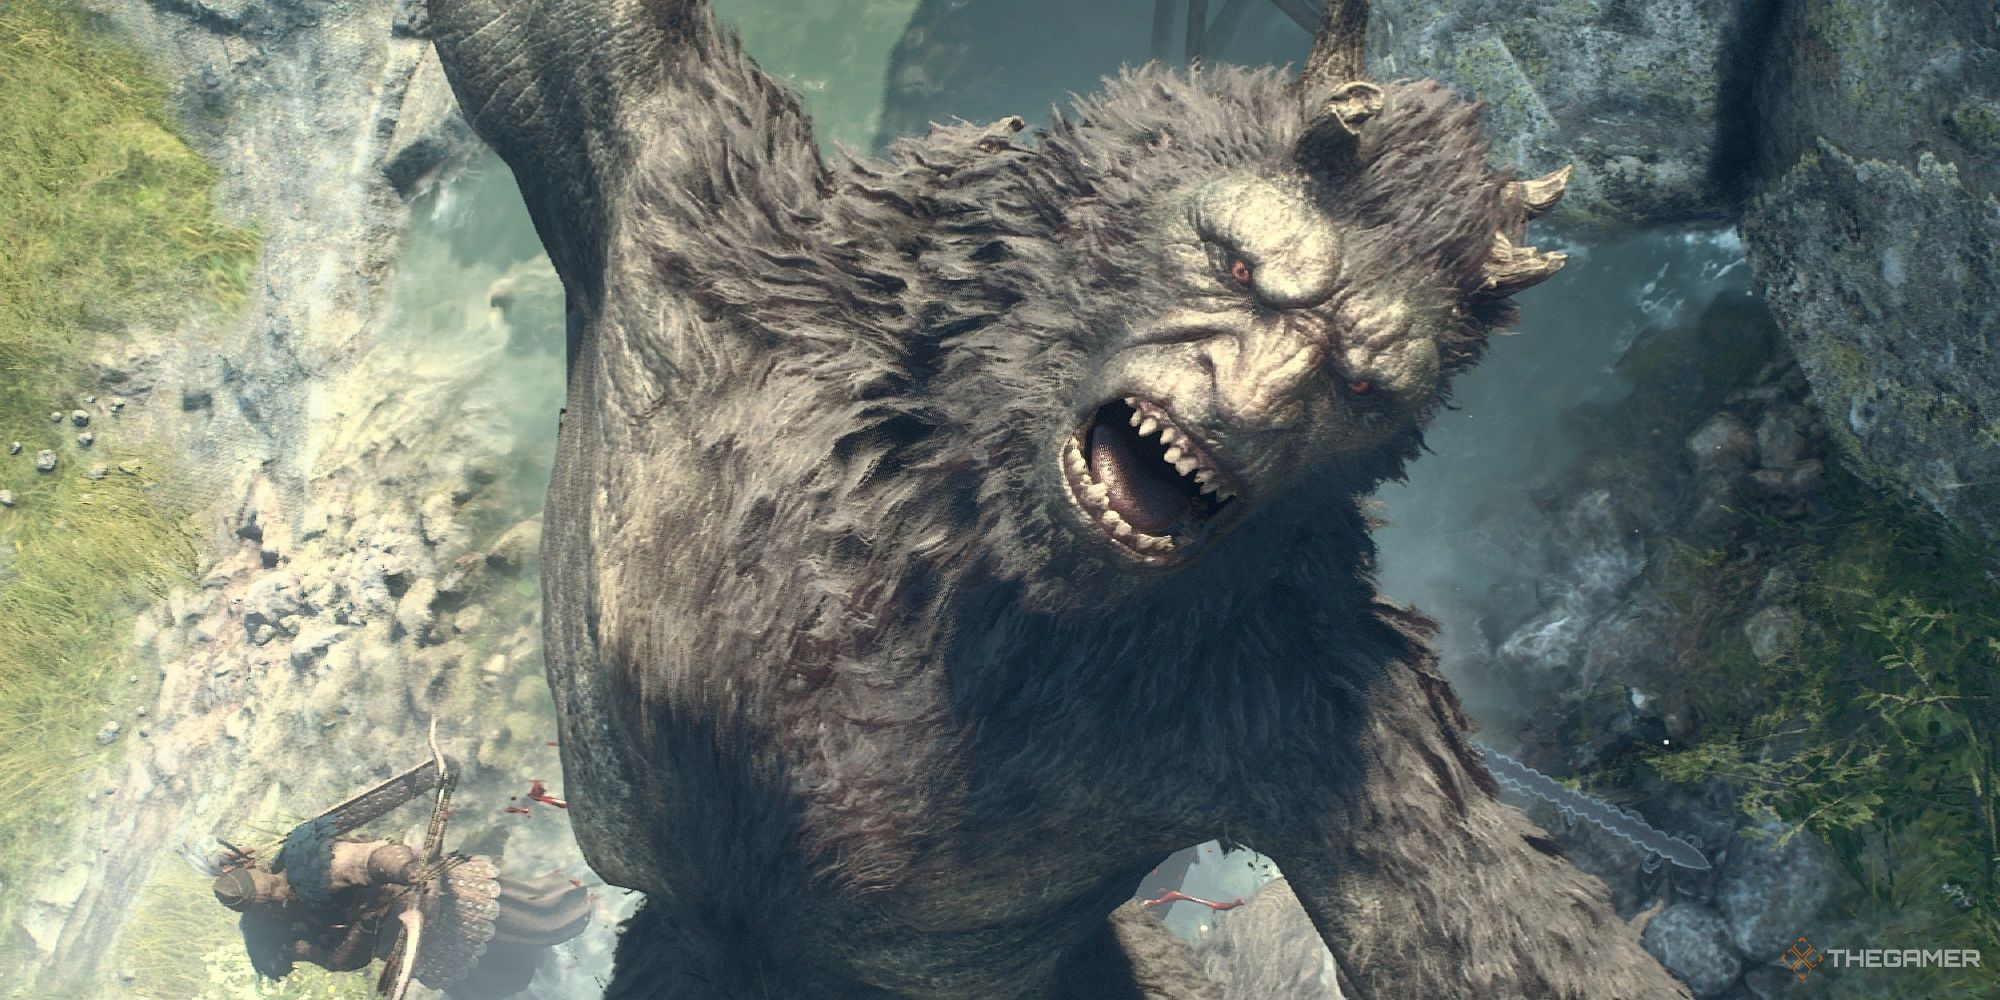 An ogre roaring while in battle with an Arisen in Dragon's Dogma 2.